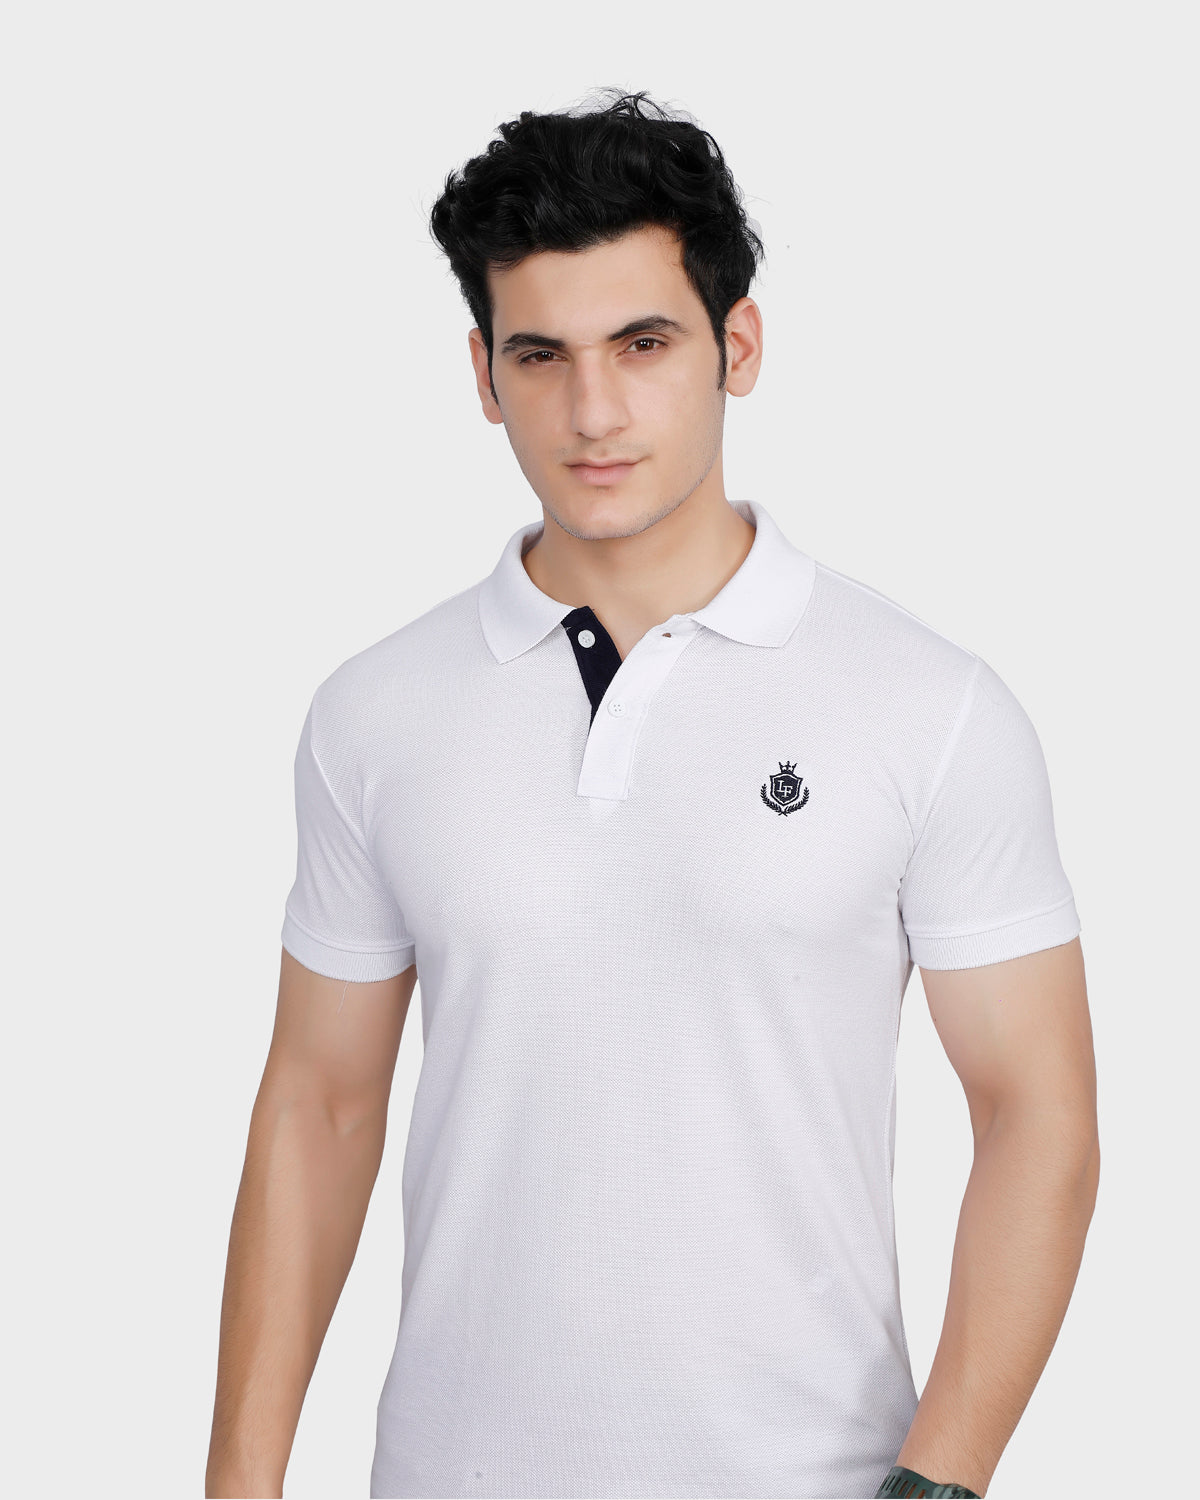 Forensic Logo Solid Classic Polo T-Shirt - White